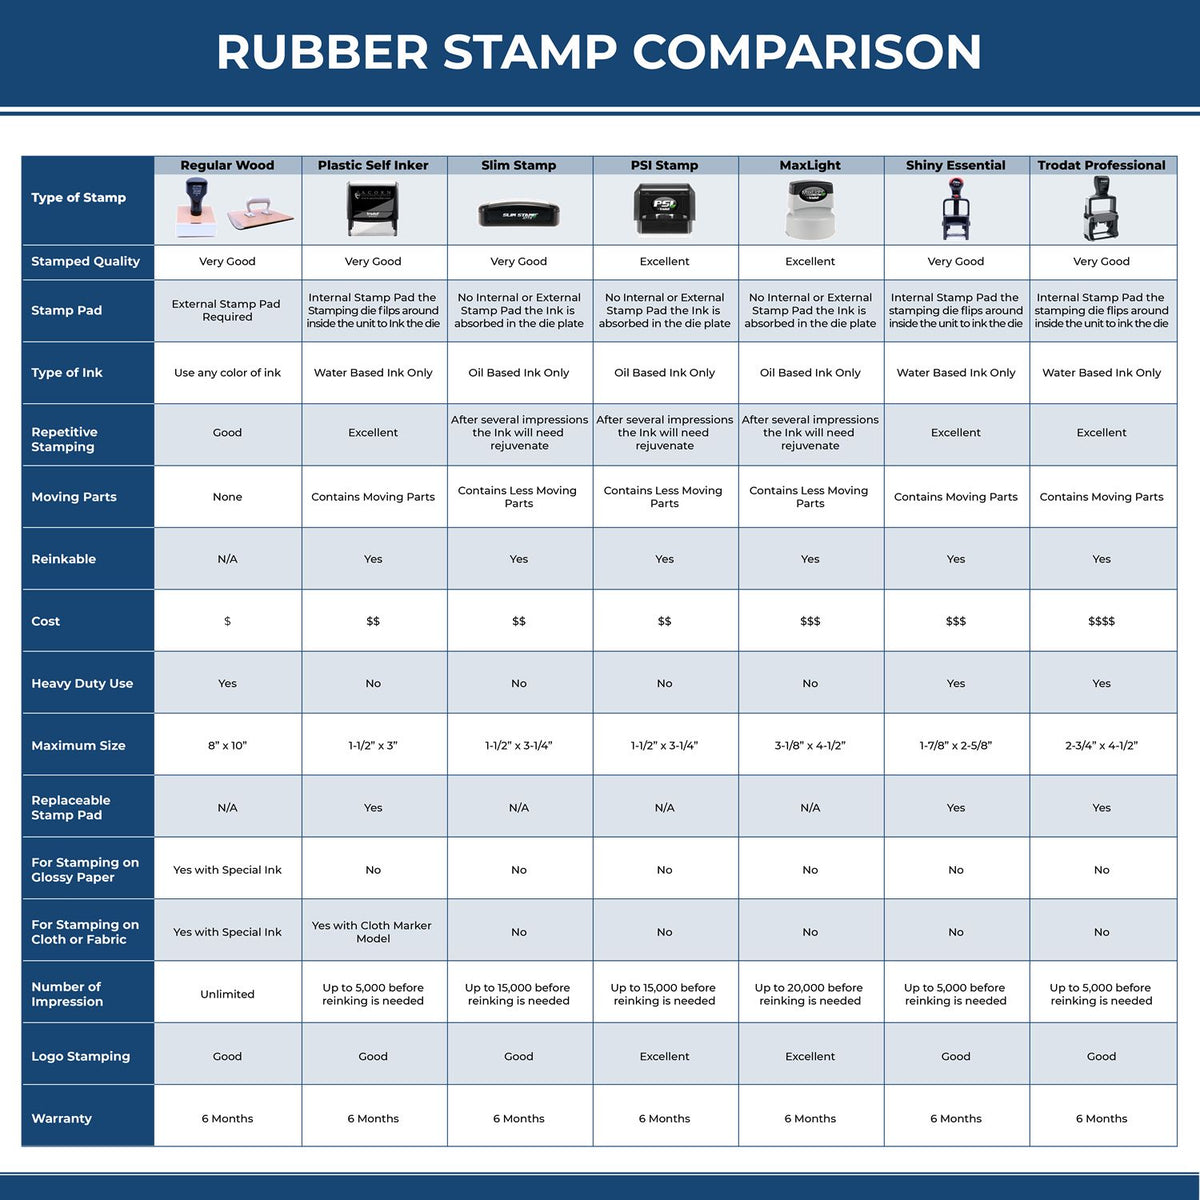 Large Self Inking Cod Office Stamp 4105S Rubber Stamp Comparison